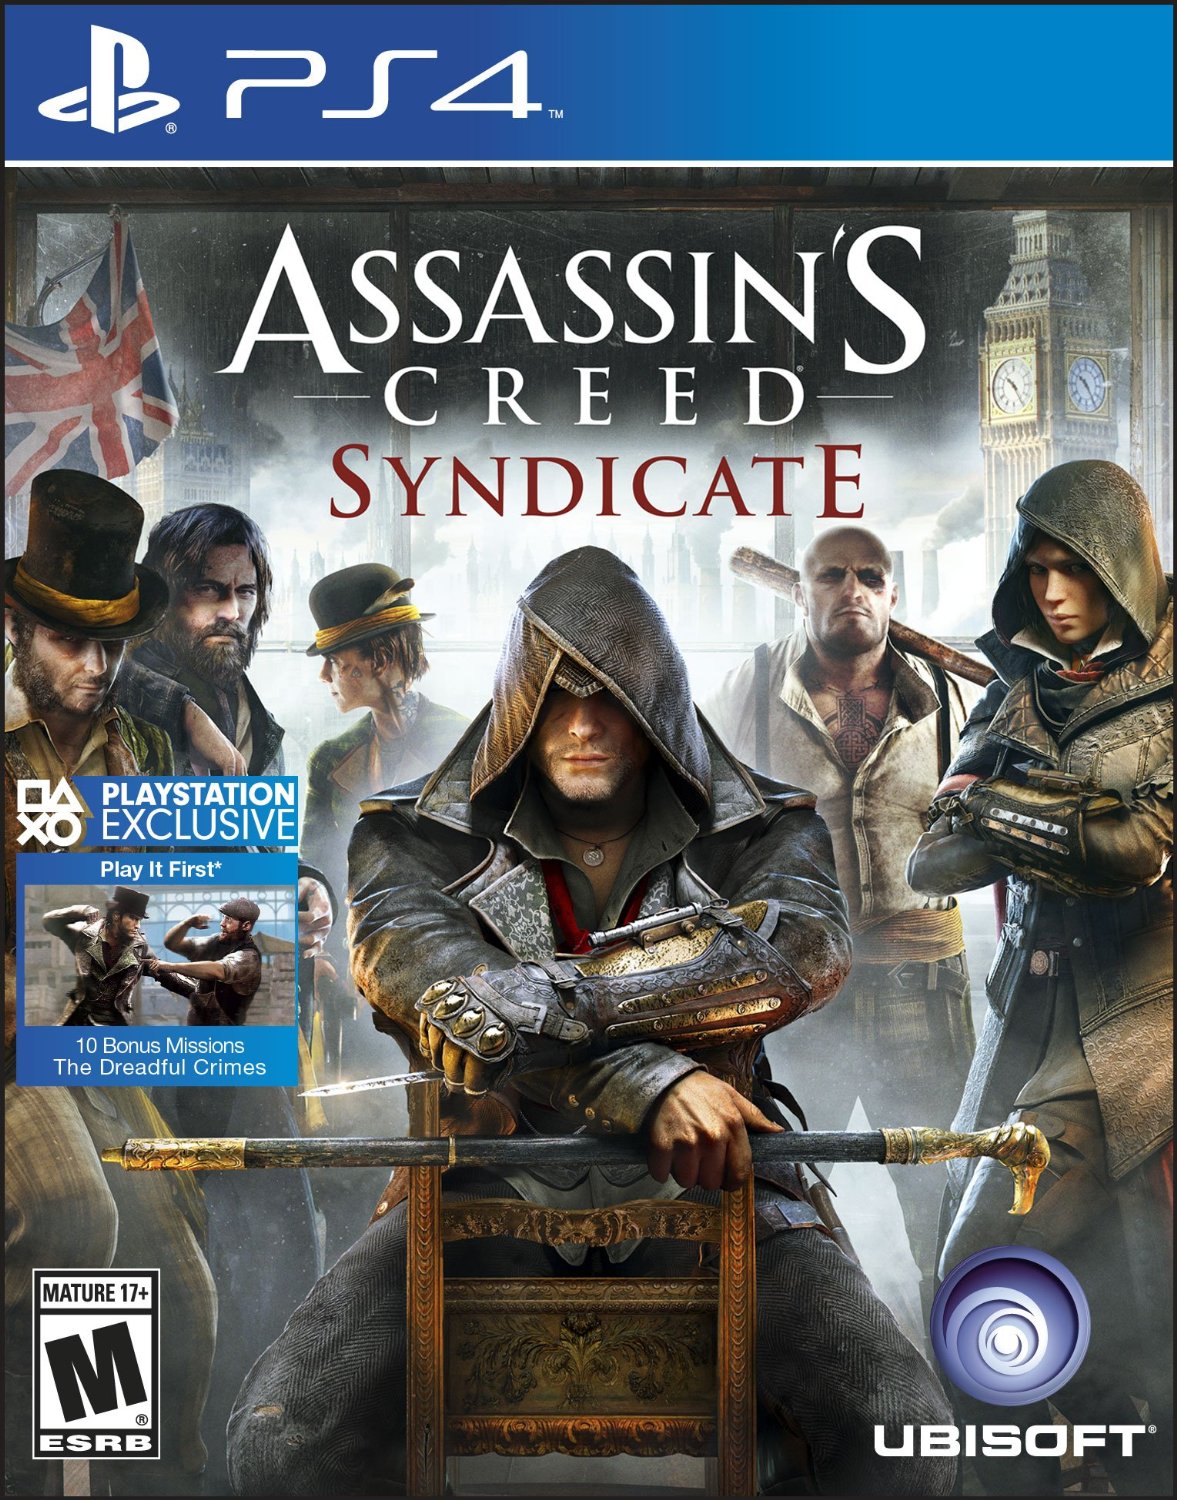 Video Game Deal: Assassin’s Creed Syndicate As Low As $29.99 – Up to 50% Savings!!